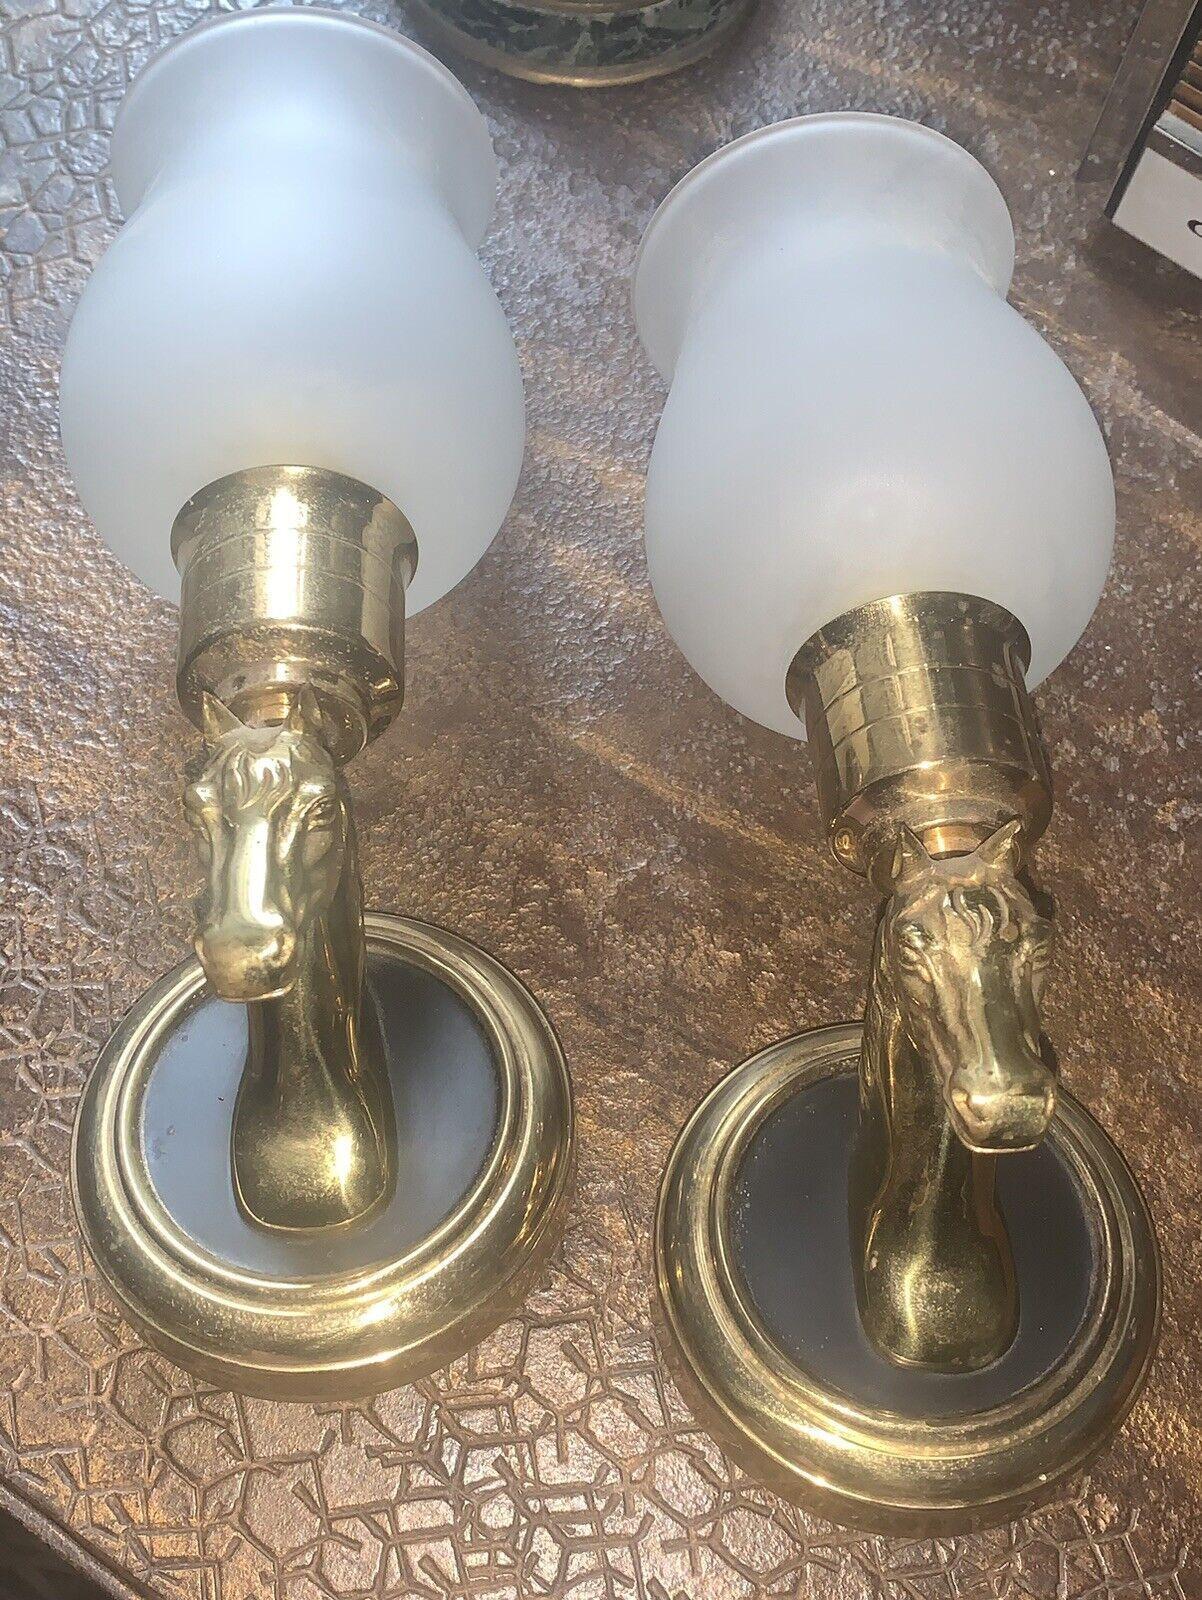 Stunning Pair of 1950's Regency Gilt Dore Bronze Horse Bust Wall Sconces. Smaller in size with opaline glass shades. For where you need an ultra high quality pair of Regency Sconces. Attributed to Maison Jansen.